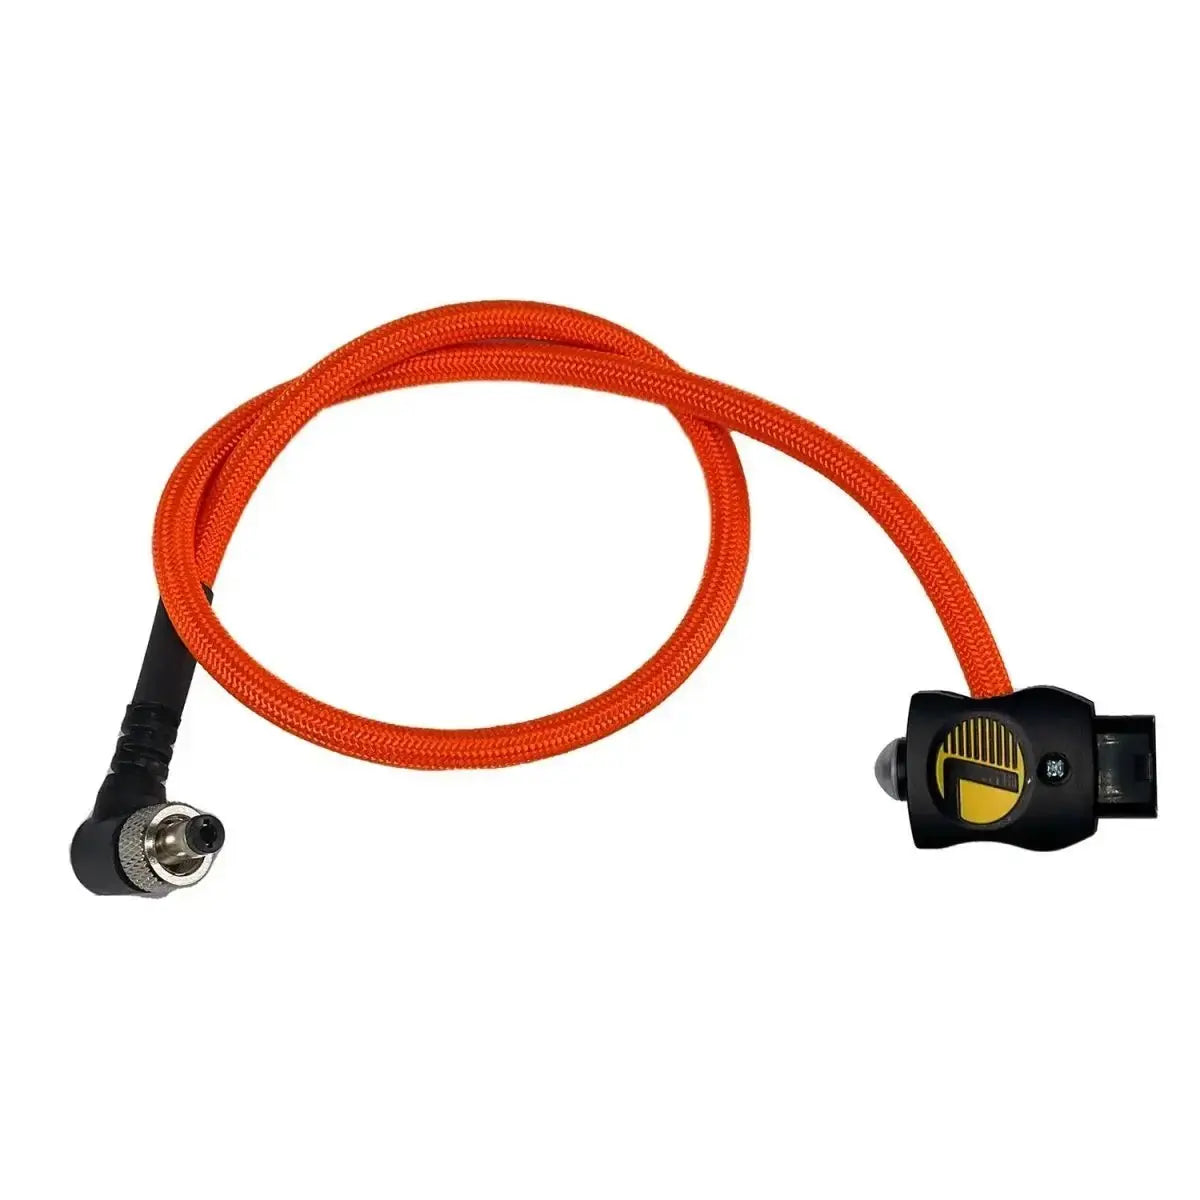 Atomos / Osee / BMD / INDIE 5+7 Locking 2.1mm Power Cables for Monitors